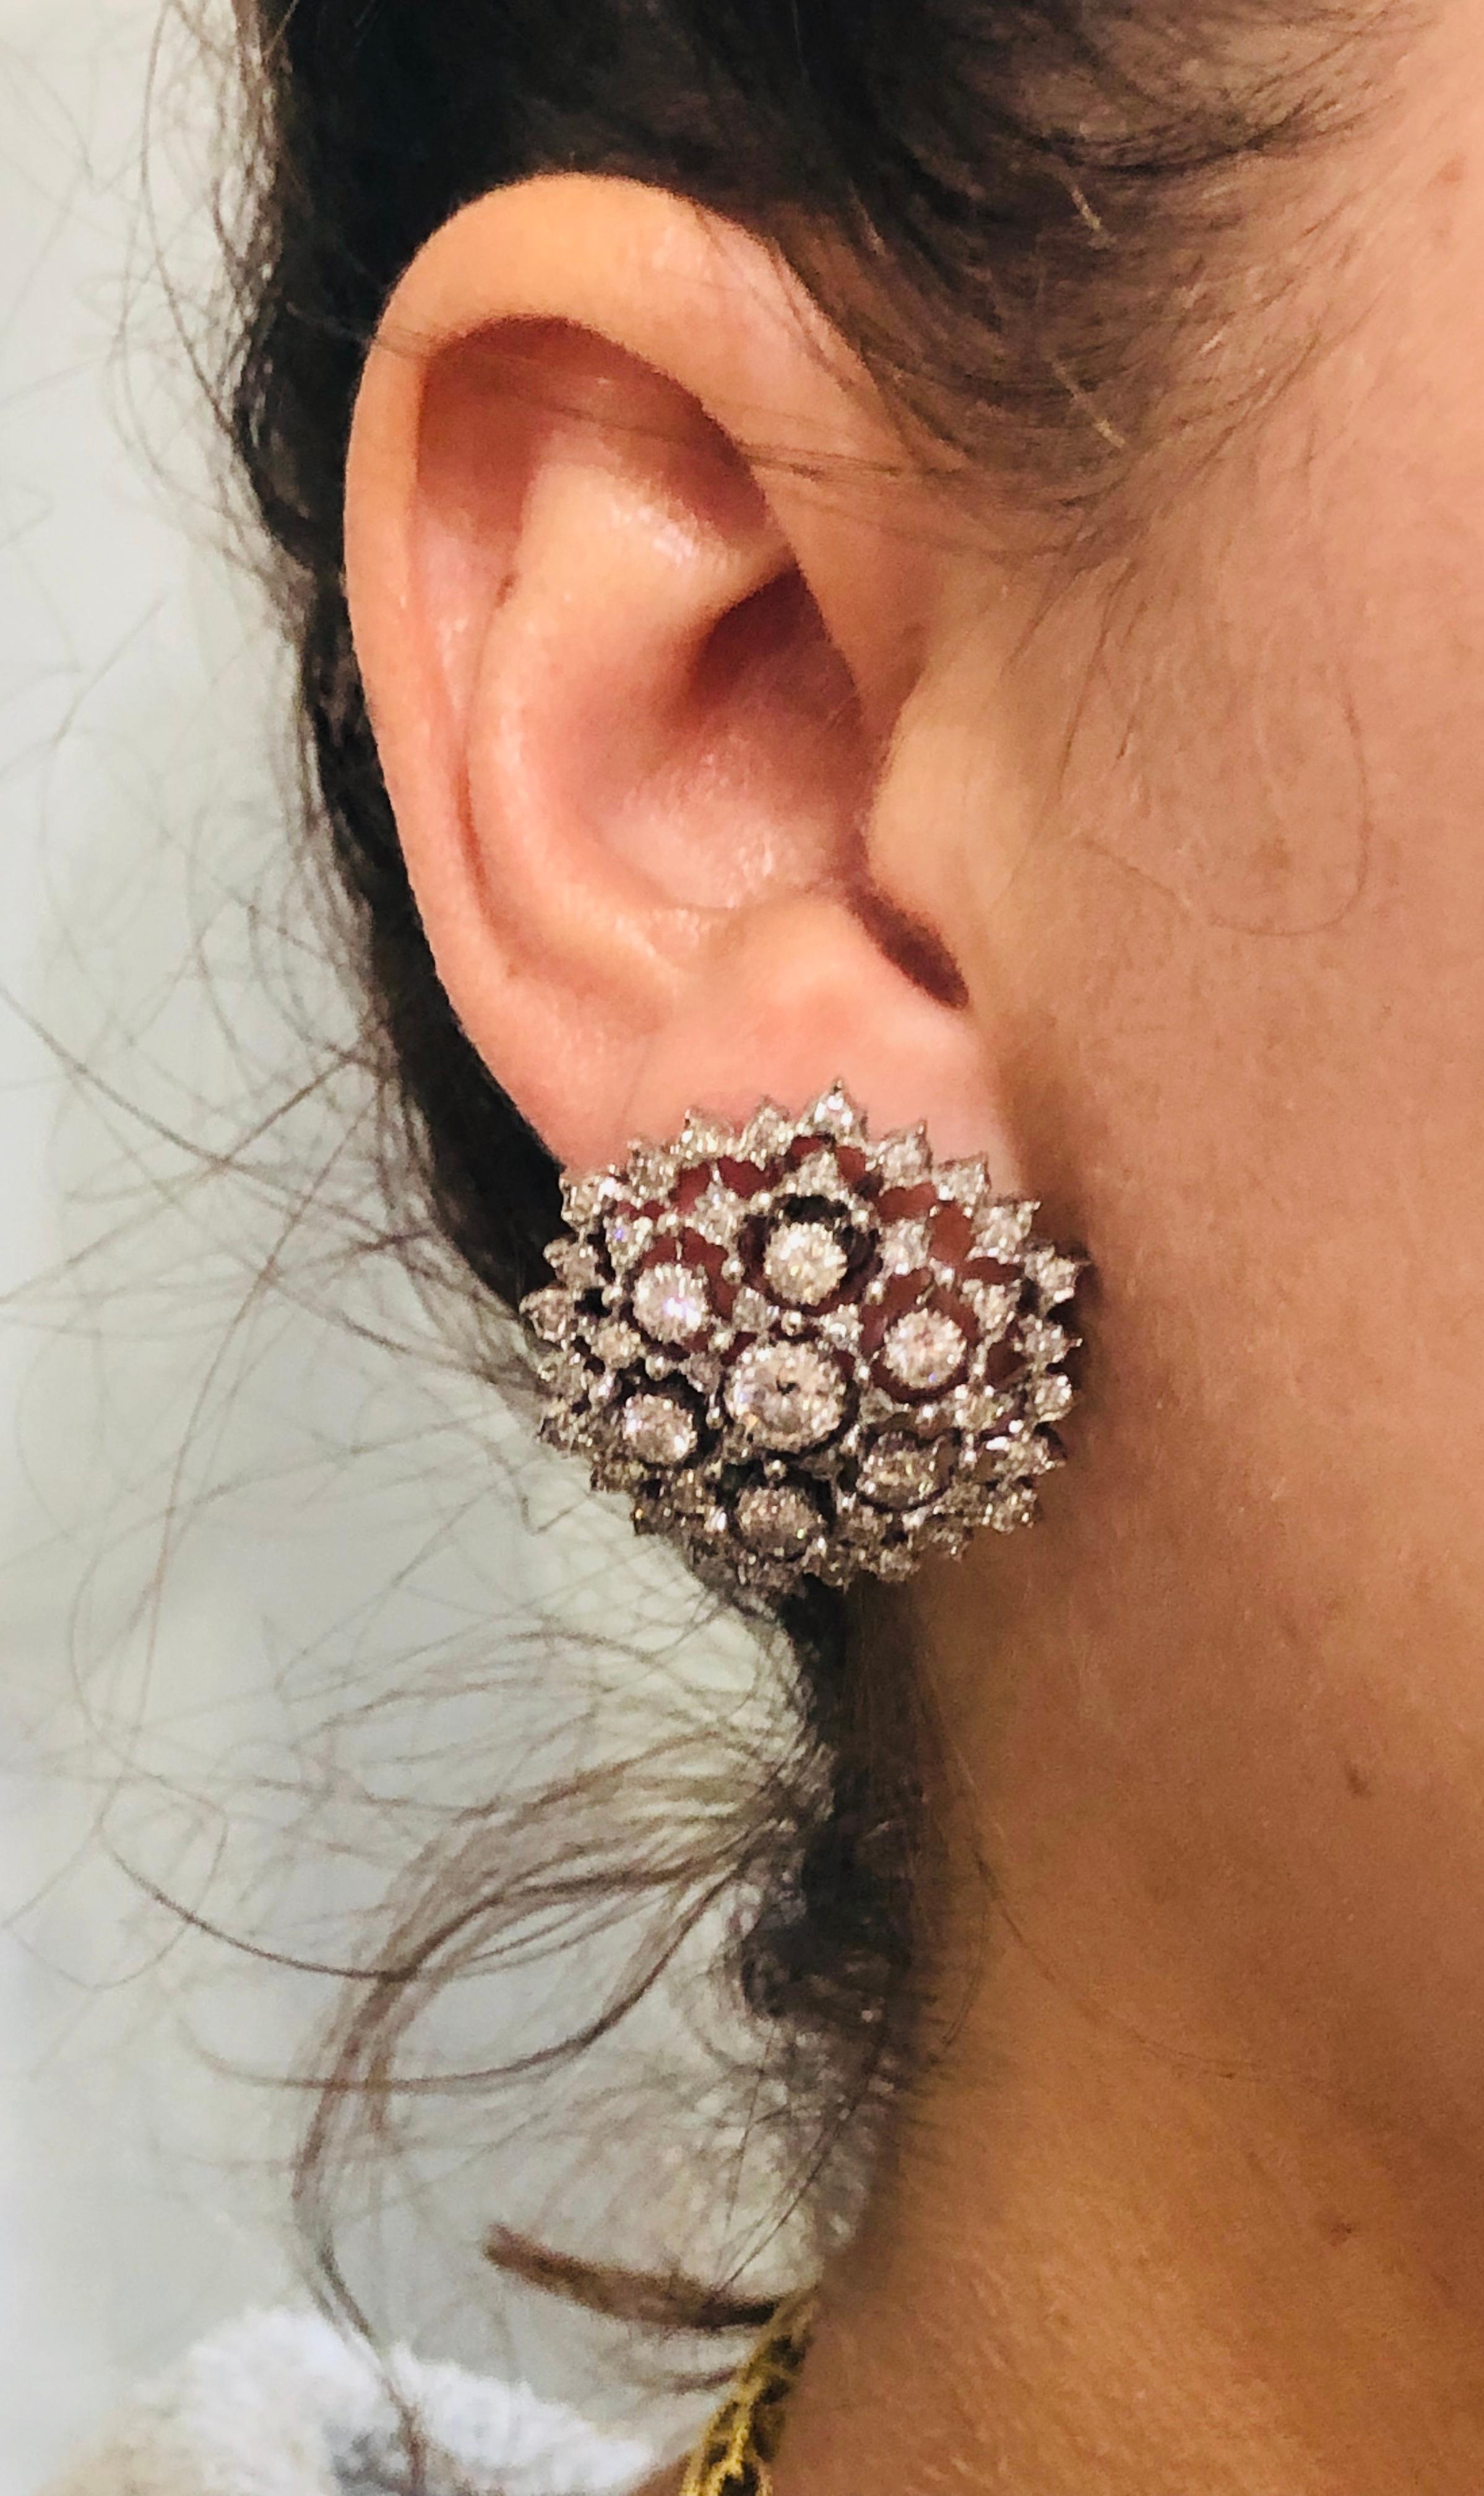 Classy and timeless ear clips created by Buccellati in Italy in the 1960s. 
Feminine, wearable and chic, the earrings are a great addition to your jewelry collection.
Made of 18 karat white gold and set with round brilliant cut and single cut